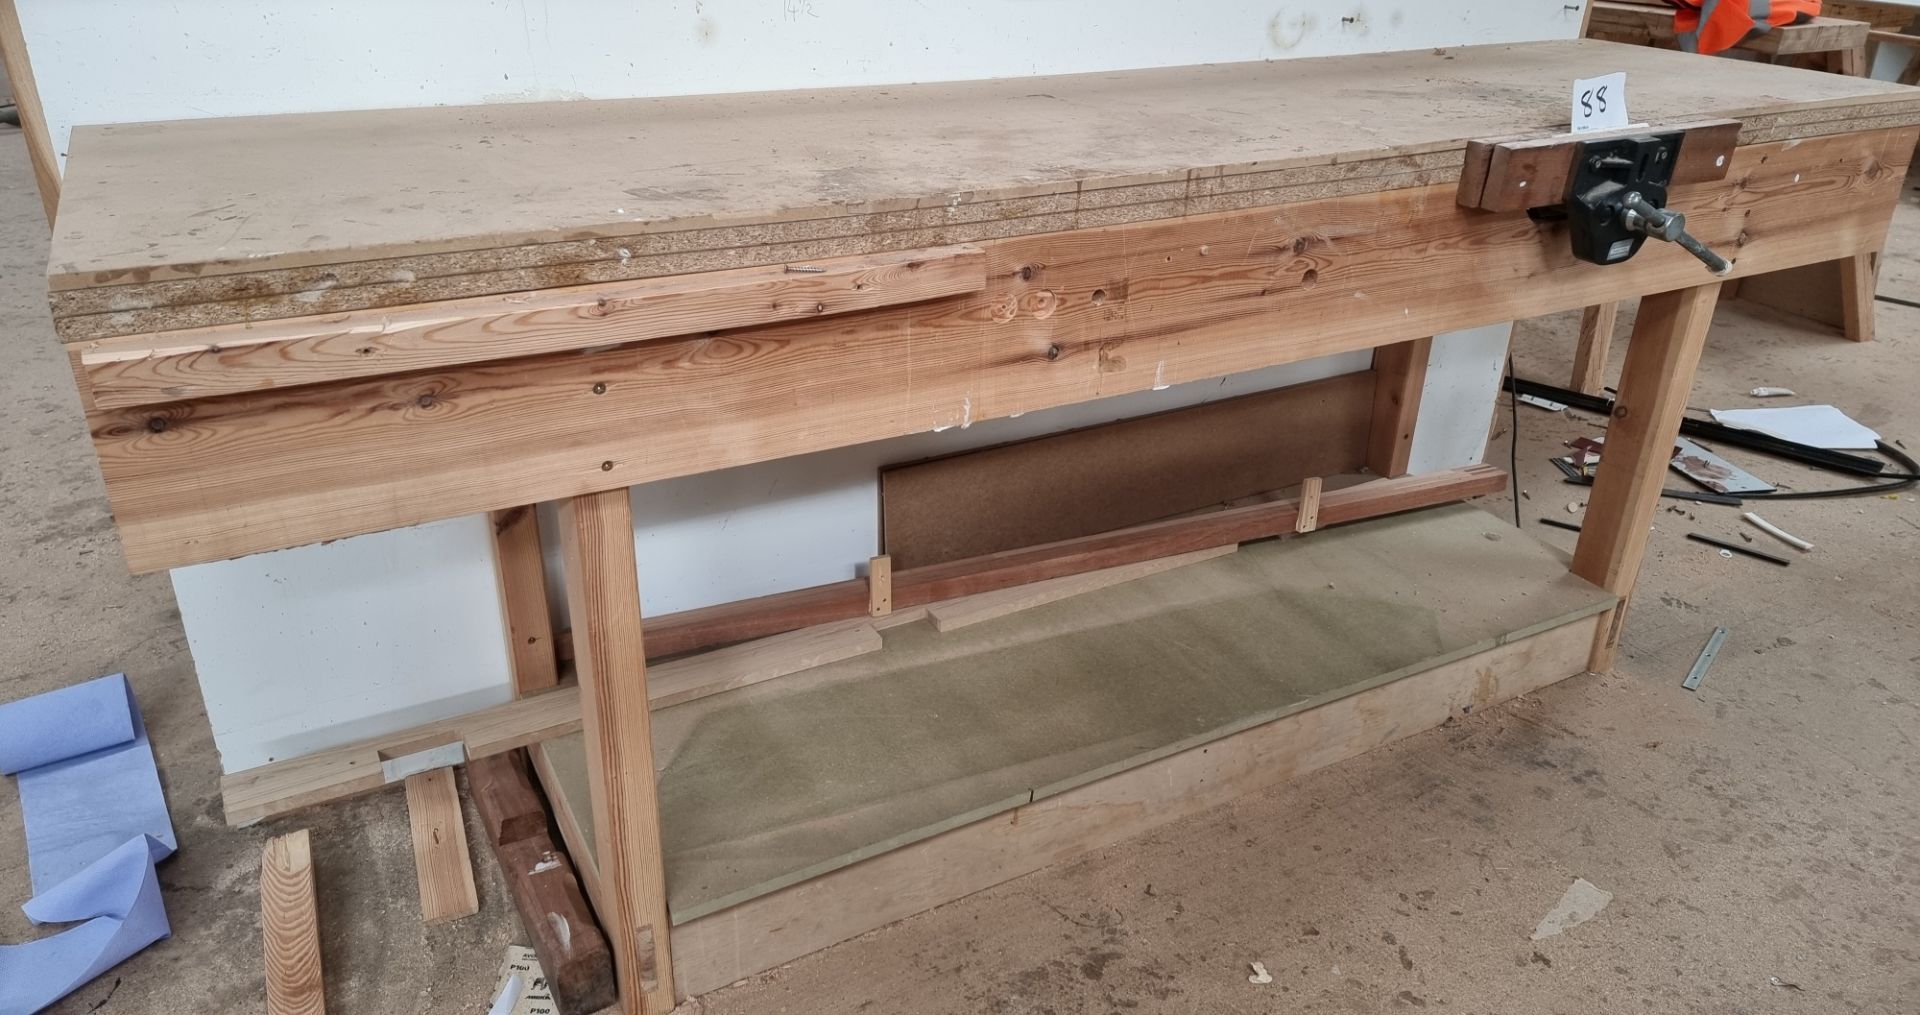 1: Bespoke c2metre bench, complete with Axminster Trade Vice Please note, contents of wooden stock n